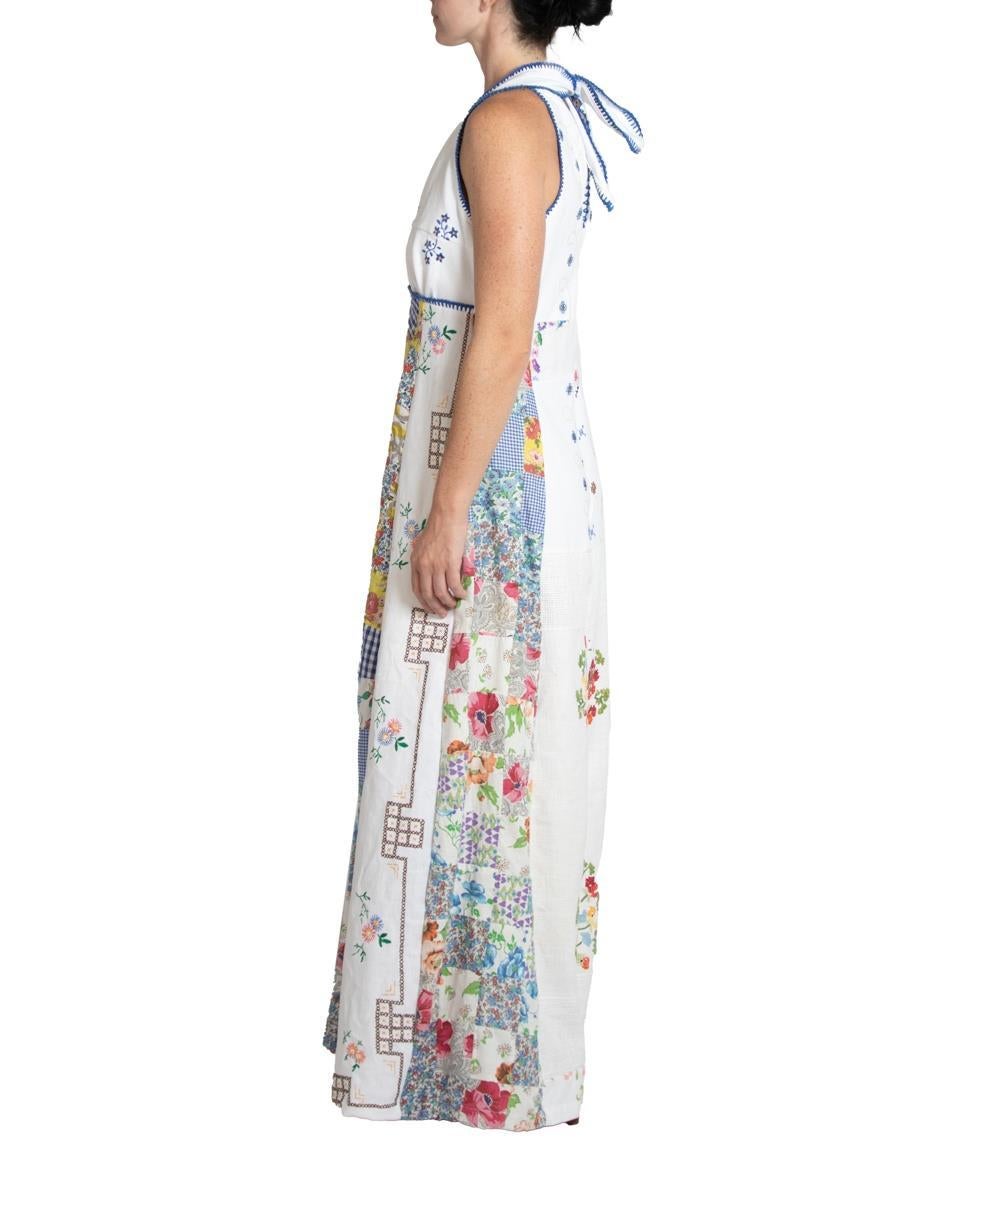 Fits M/L Morphew Collection White & Blue Organic Cotton Hand Embroidered Jumpsuit 
MORPHEW COLLECTION is made entirely by hand in our NYC Ateliér of rare antique materials sourced from around the globe. Our sustainable vintage materials represent